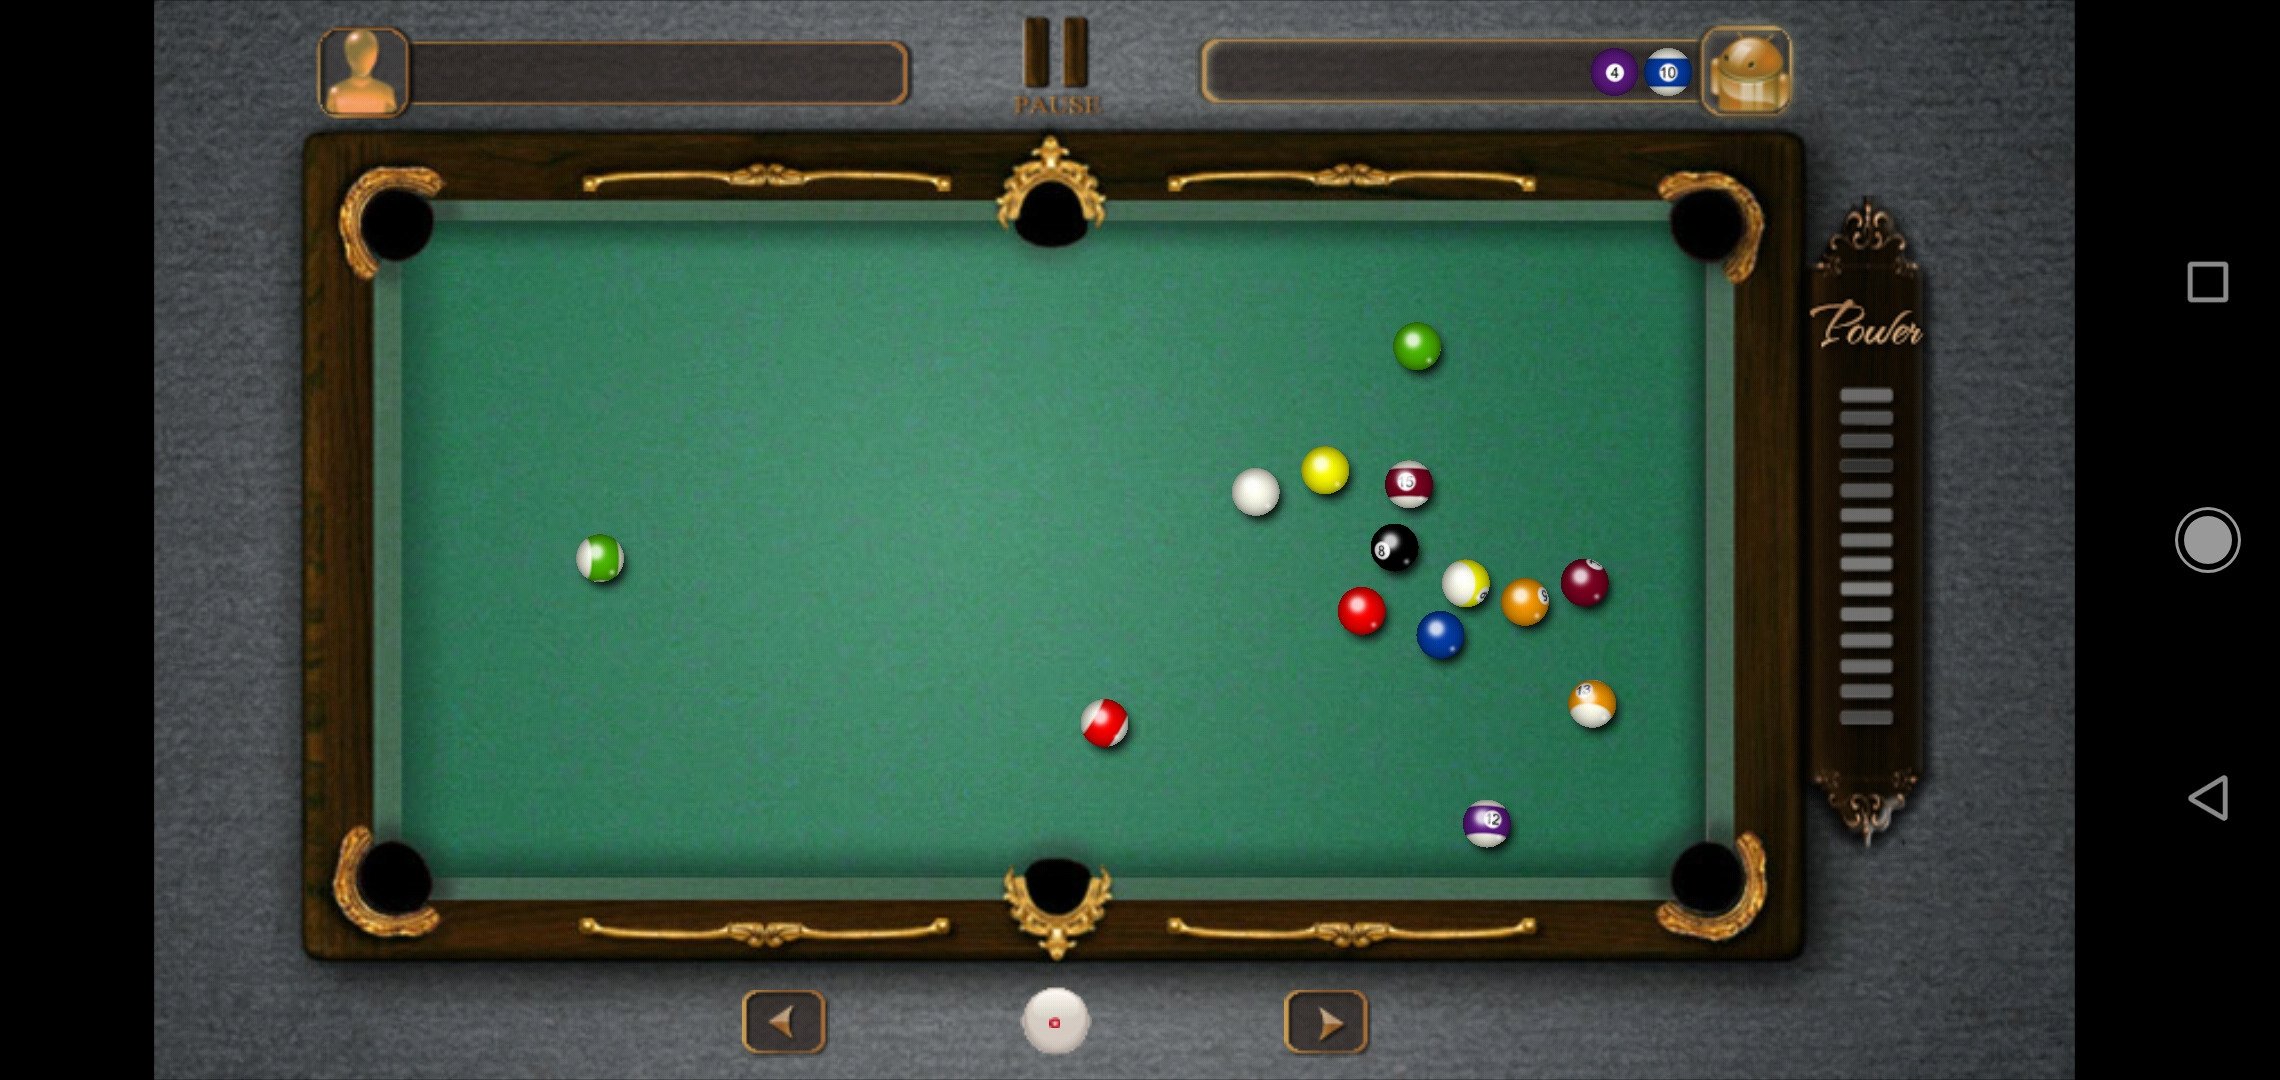 Pool Challengers 3D for mac download free